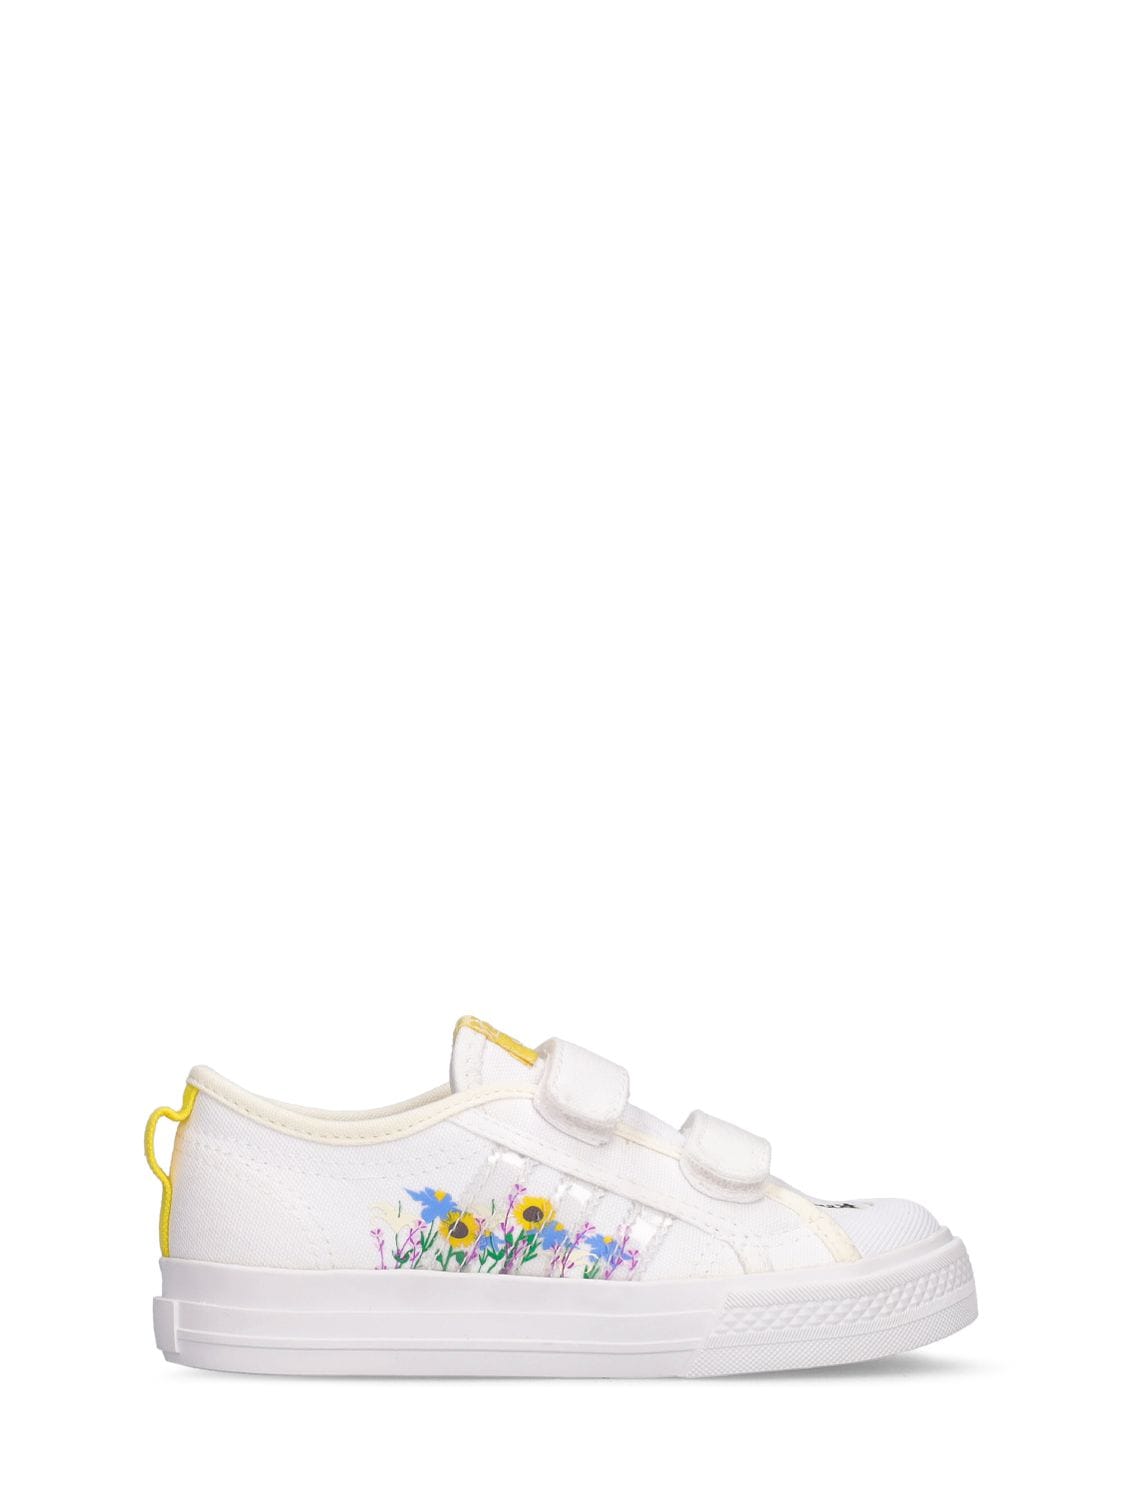 Image of Nizza Printed Strap Sneakers